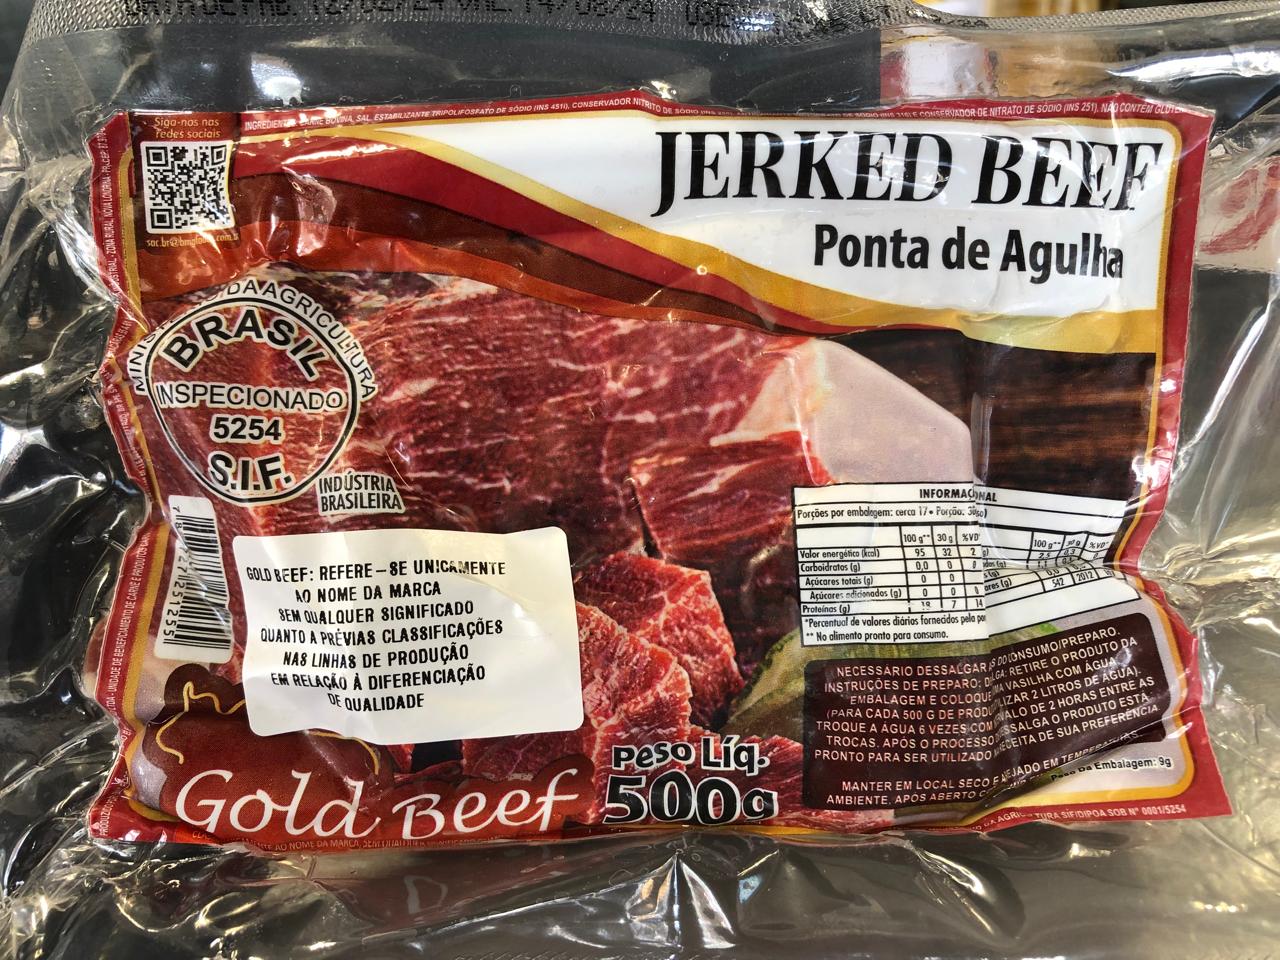 Jerked-Beef-P.A-GOLD-BEEF-5800